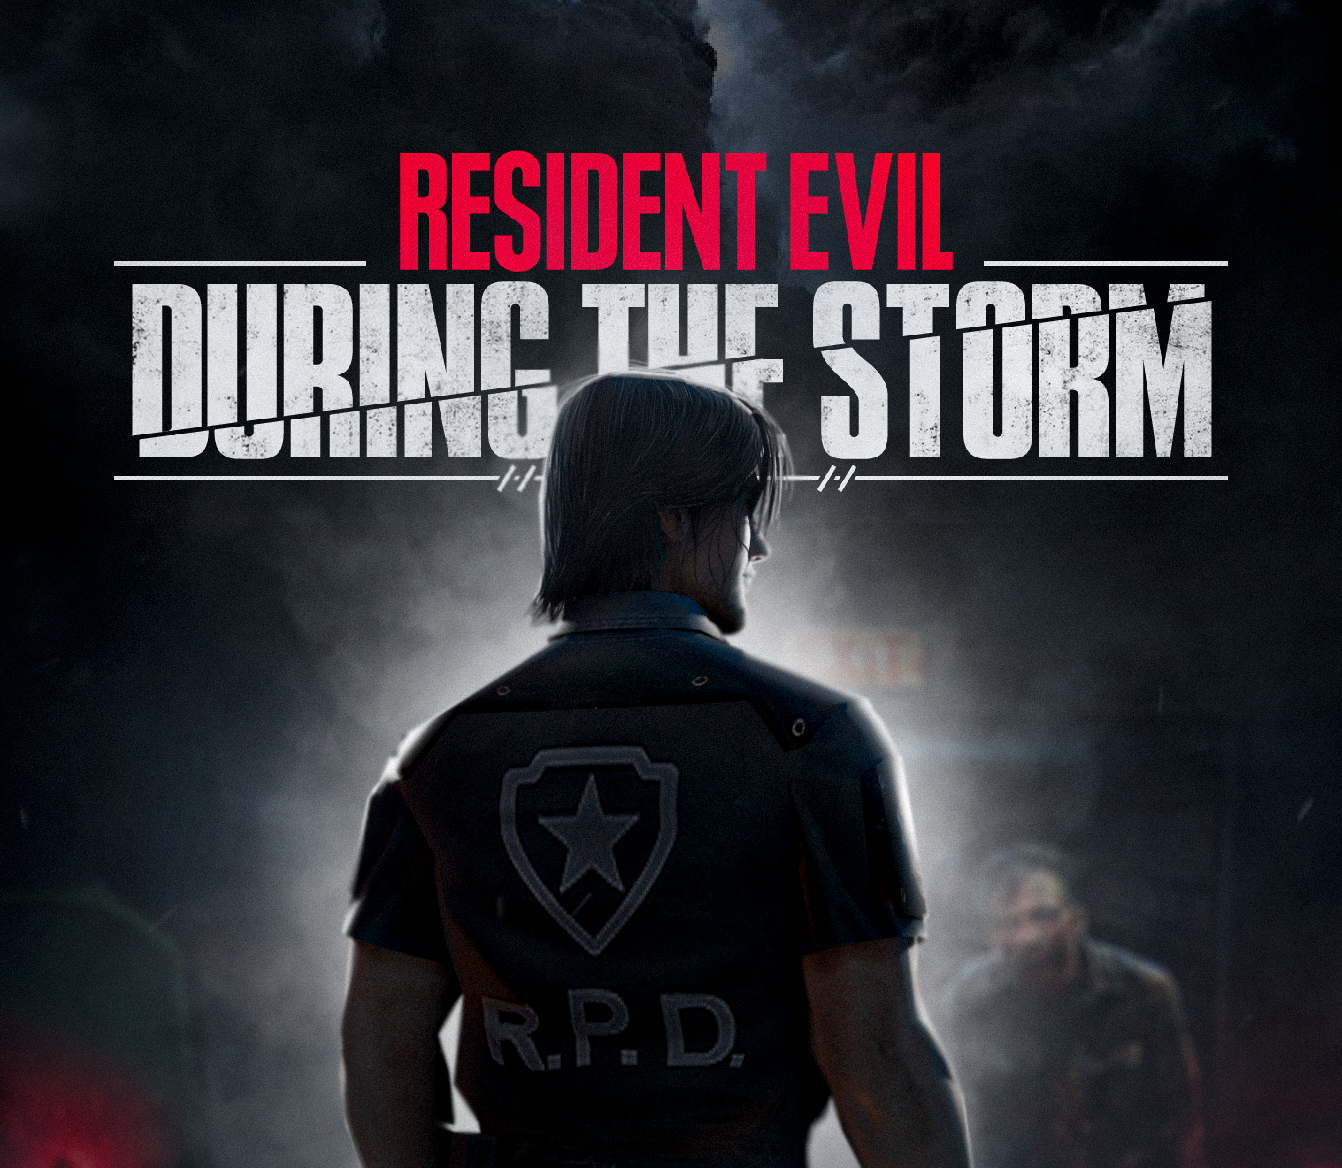 Atar Compuesto oportunidad Resident Evil: During the Storm mod - Mod DB